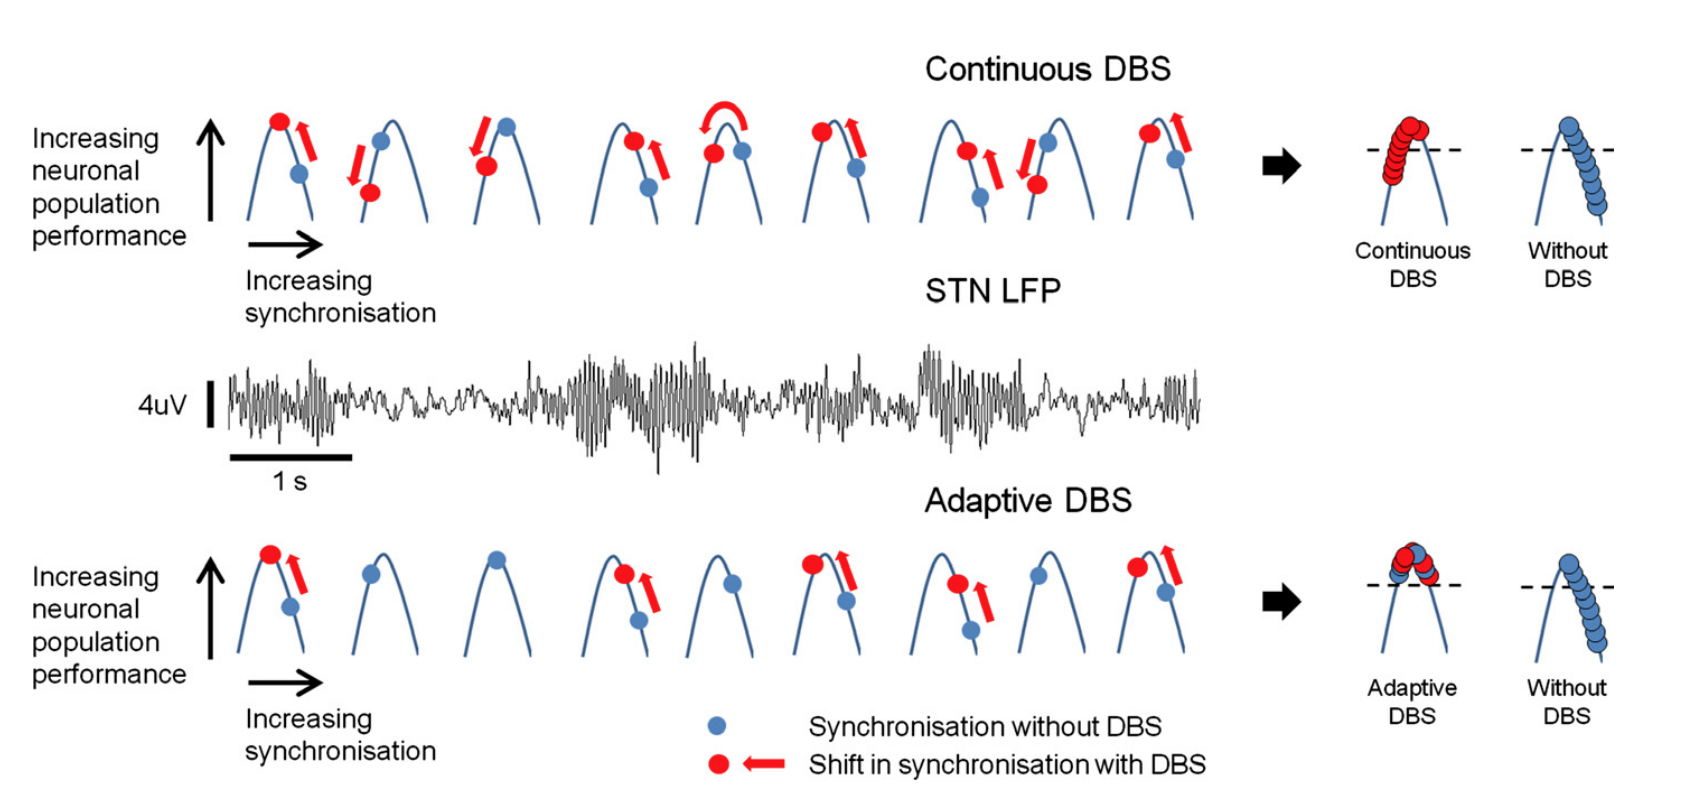 The highs and lows of beta activity in cortico-basal ganglia loops.